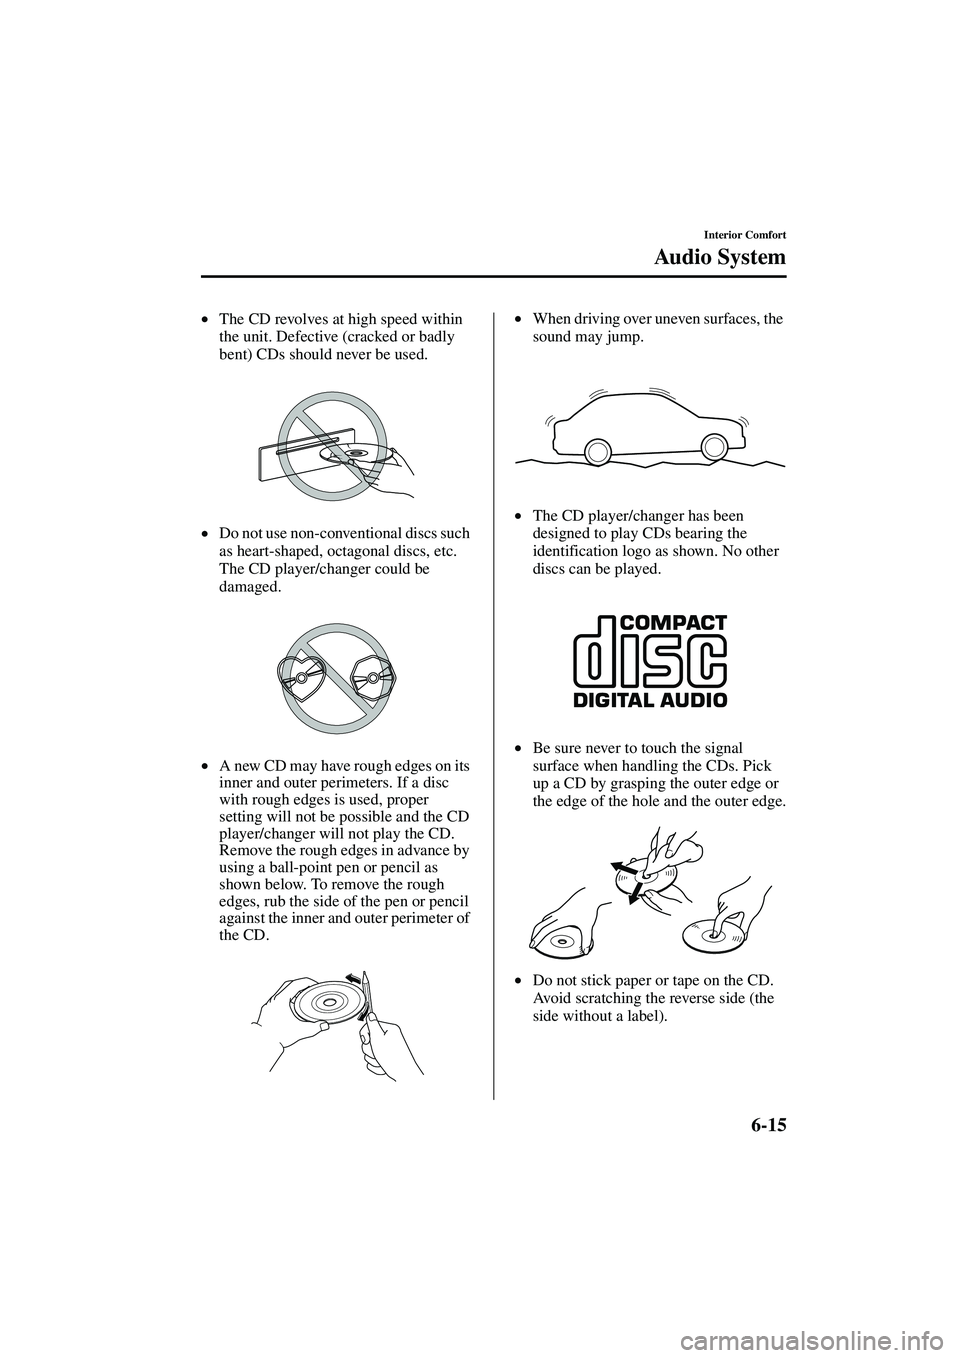 MAZDA MODEL MX-5 MIATA 2003  Owners Manual 6-15
Interior Comfort
Au di o S ys t em
Form No. 8R09-EA-02G
•The CD revolves at high speed within 
the unit. Defective (cracked or badly 
bent) CDs should never be used.
• Do not use non-conventi